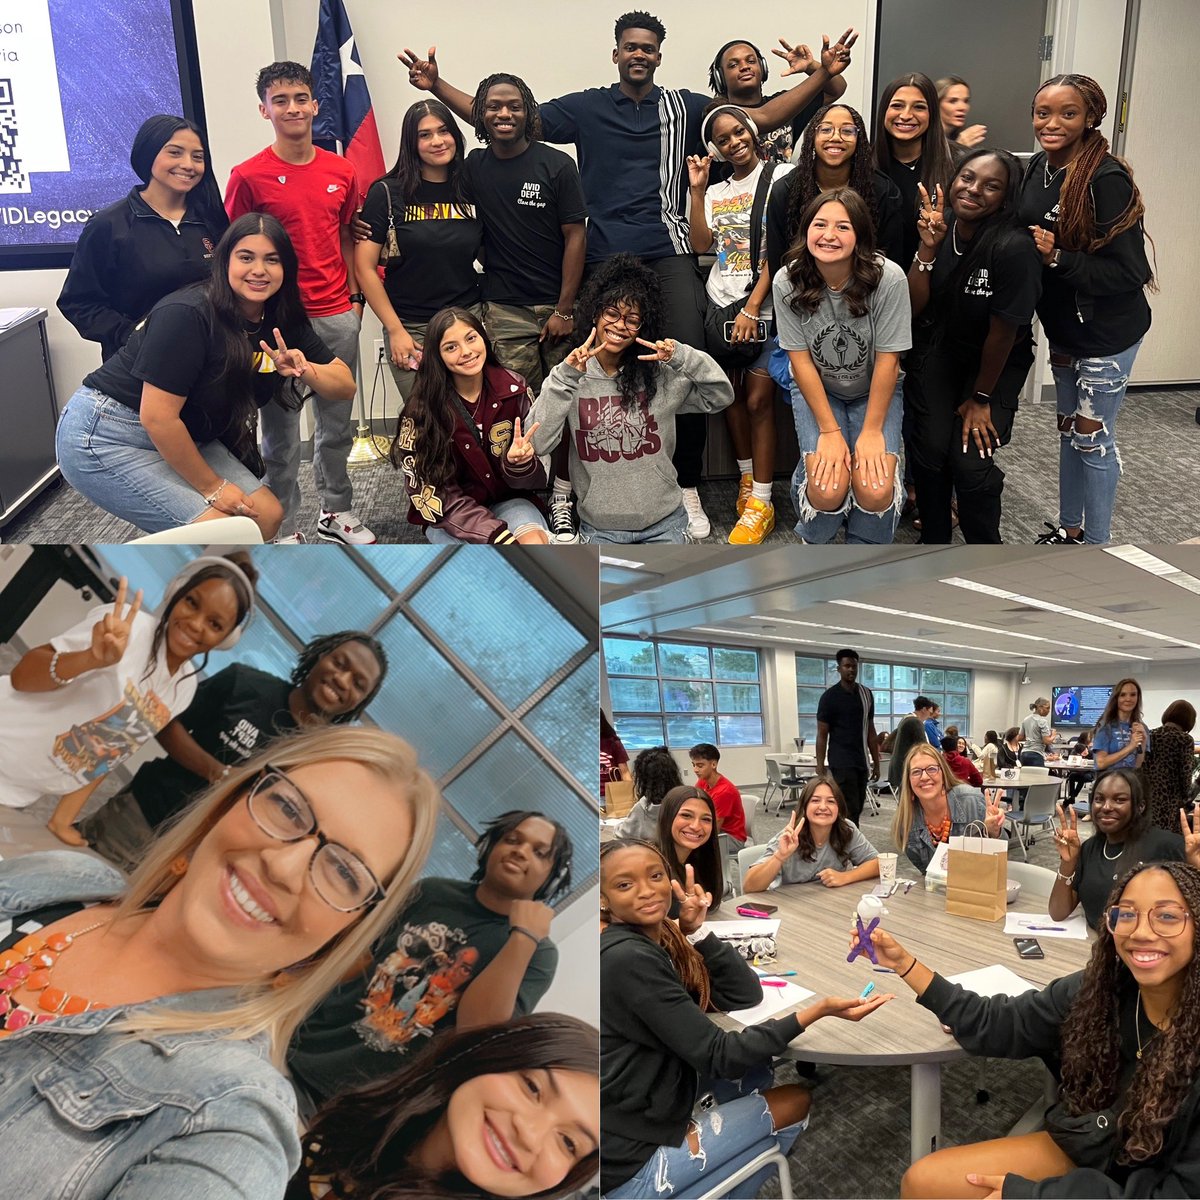 We had a fantastic day with Mr. Tim Harrison and our amazing AVID leaders from across the district! 🙌🎉Today was so inspiring and brought me back to my purpose and the WHY behind everything I do.💜I’m beyond proud of our AVID family. @HumbleISD_SCHS @HumbleISD_AVID #ThisIsAVID